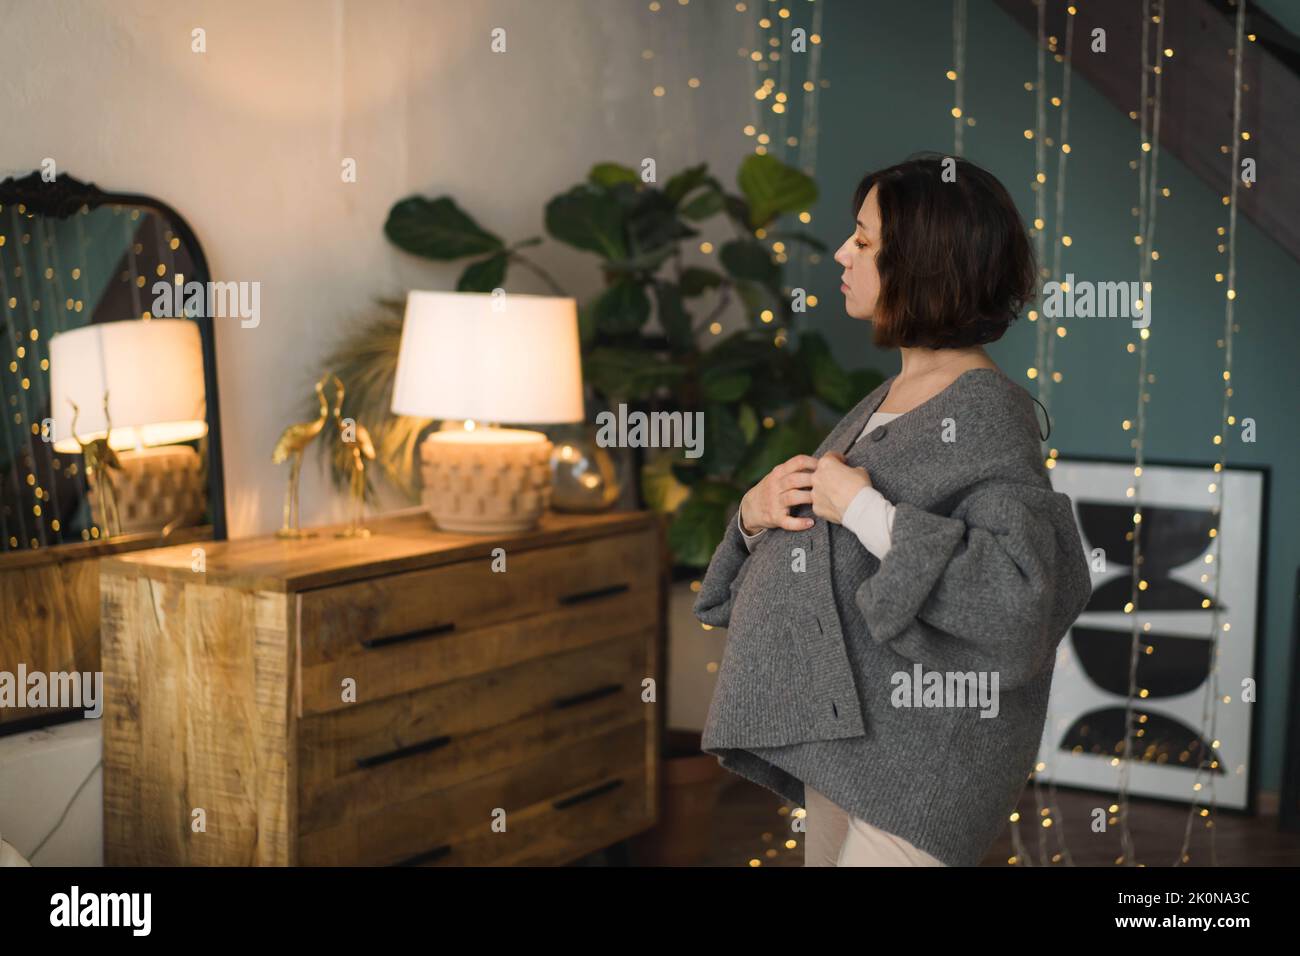 A young pregnant woman looks at herself in the mirror. Close-up portrait photo of a pregnant woman in a warm knitted sweater . Concept of happy pregnancy, motherhood, expecting baby. Stock Photo